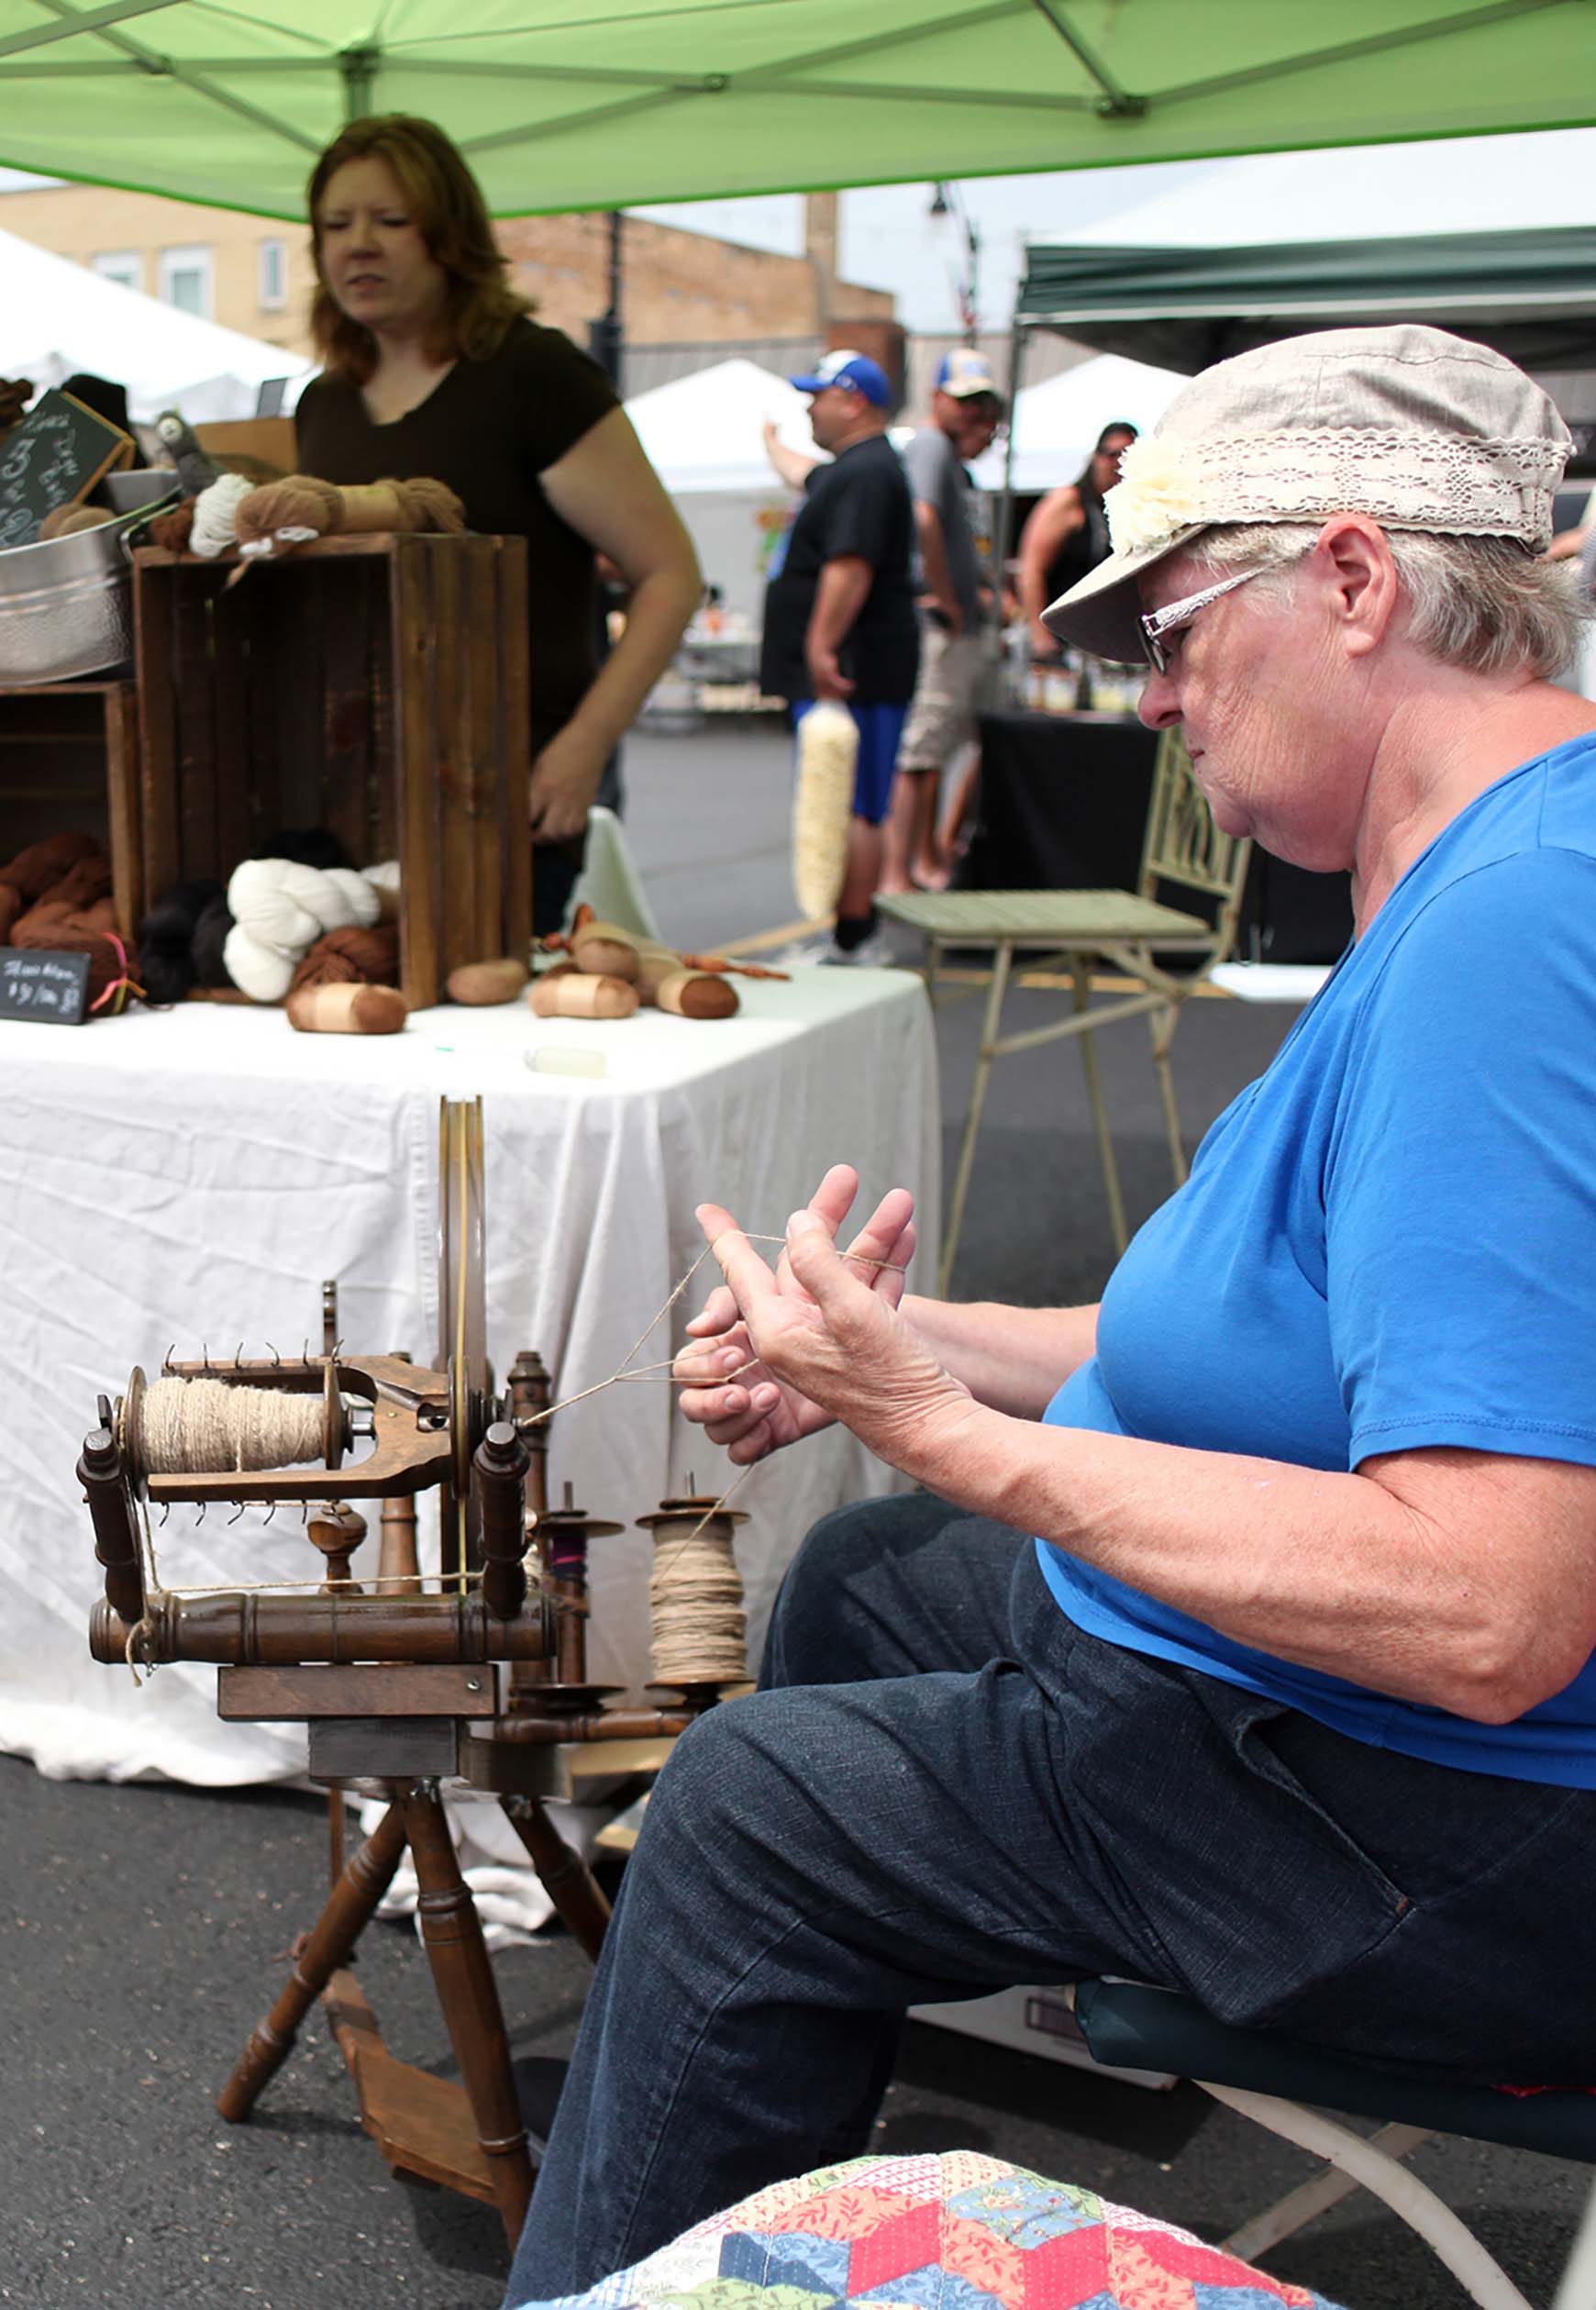  Leslie McHugh, left, runs their farm booth Saturday during the Kankakee Farmers Market in downtown Kankakee while Rosie McHugh spins yarn from their families alpaca herd. The farm was established in 2007 in rural Martinton, and is home to an alpaca 